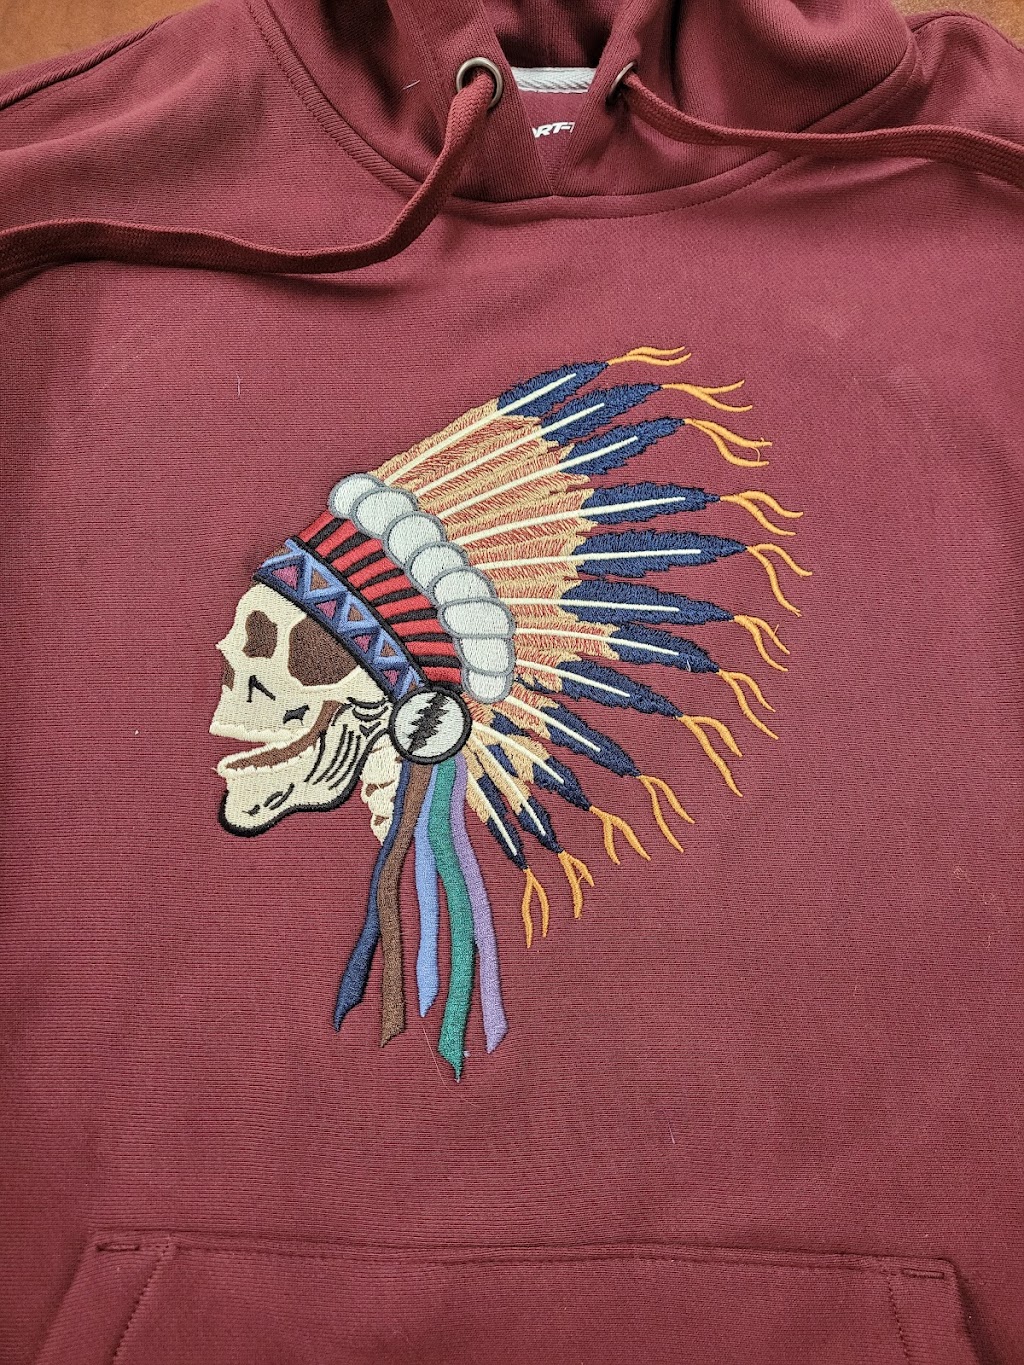 Independent Embroidery | 1069 Ringwood Ave, Haskell, NJ 07420 | Phone: (267) 971-0434